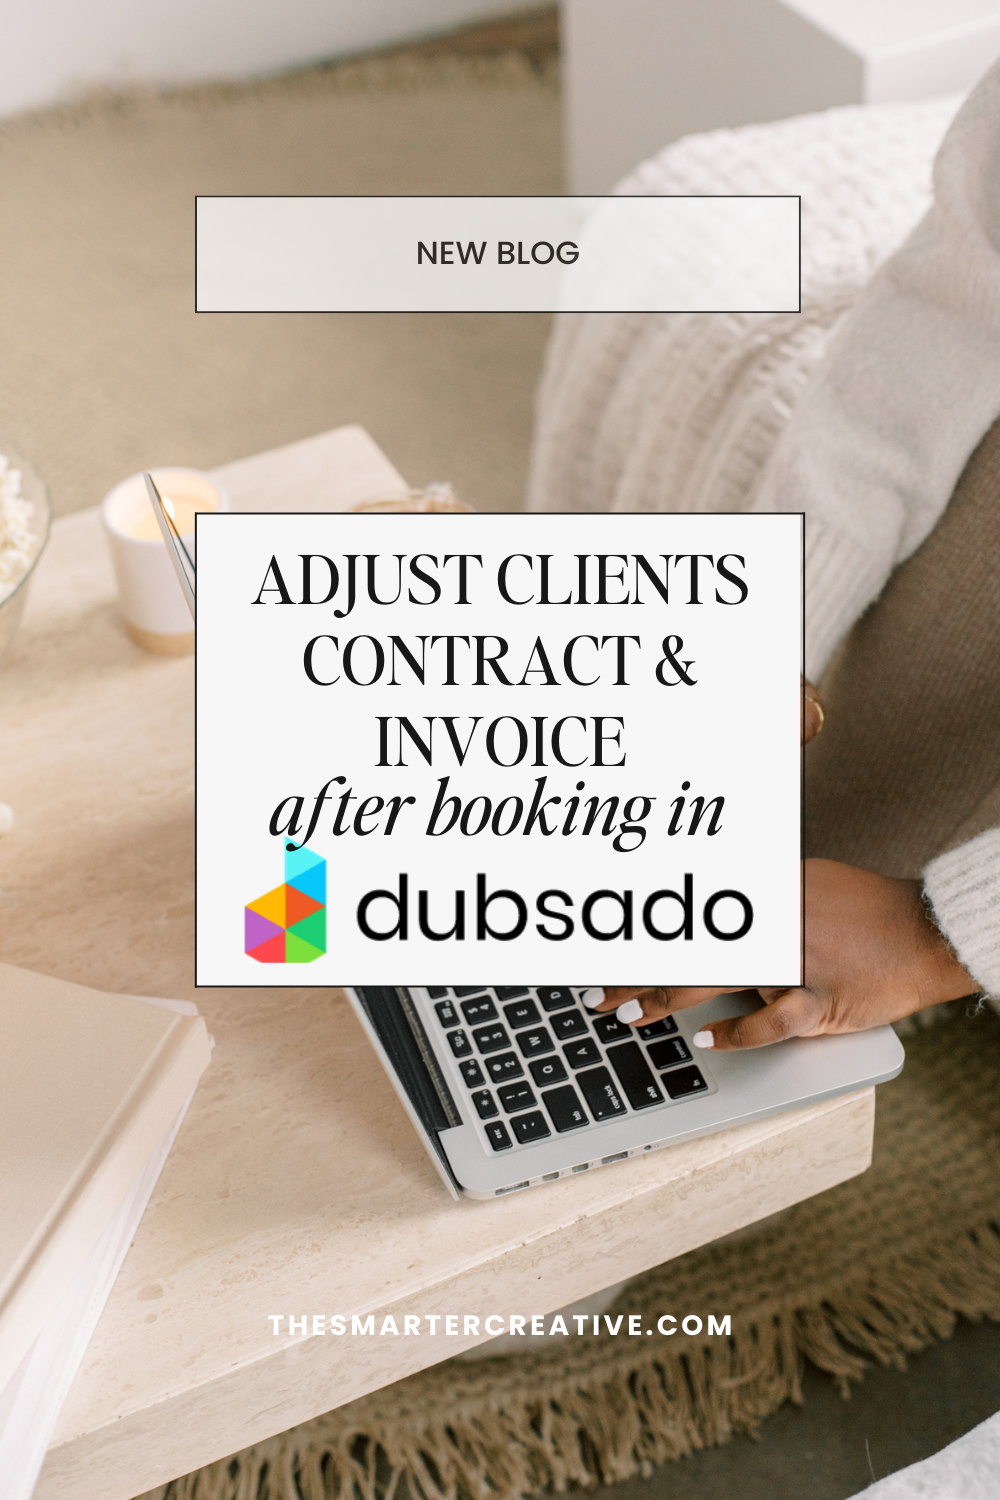 New Blog Graphic - Adjust Clients Contracts & Invoice AFTER BOOKING IN Dubsado